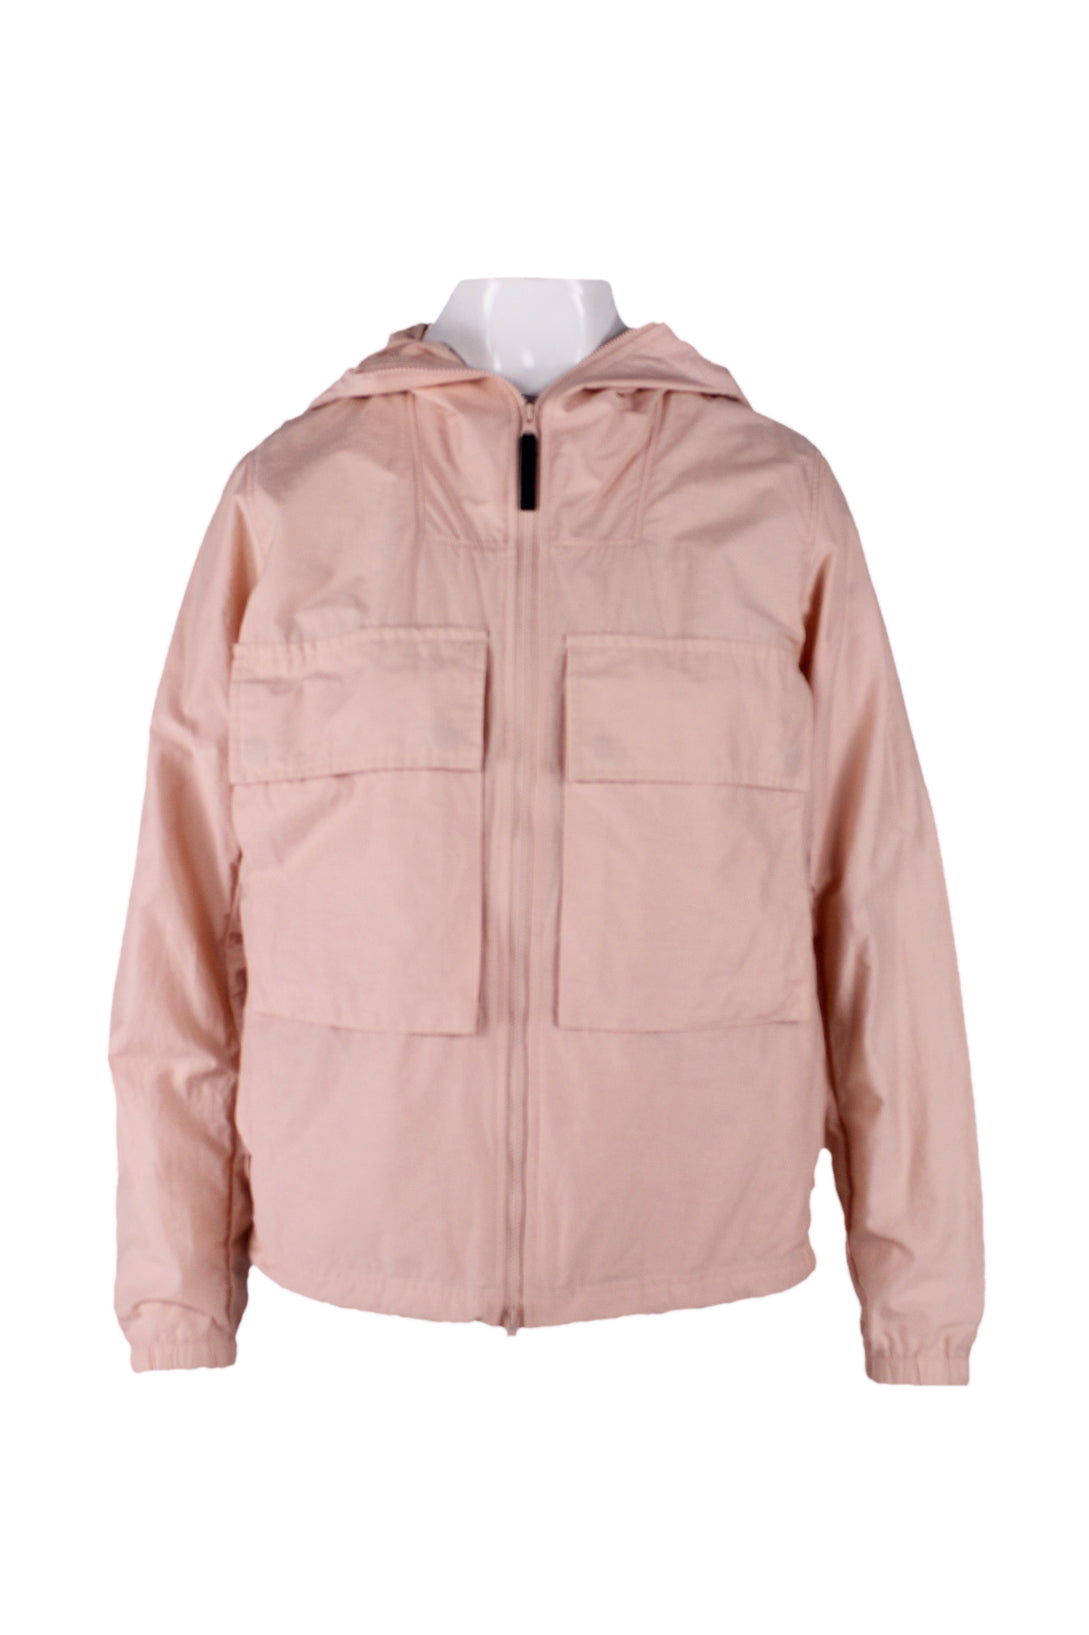 saturdays nyc clay pink long sleeve windbreaker jacket with a front double-sided zipper closure and two chest pockets. 